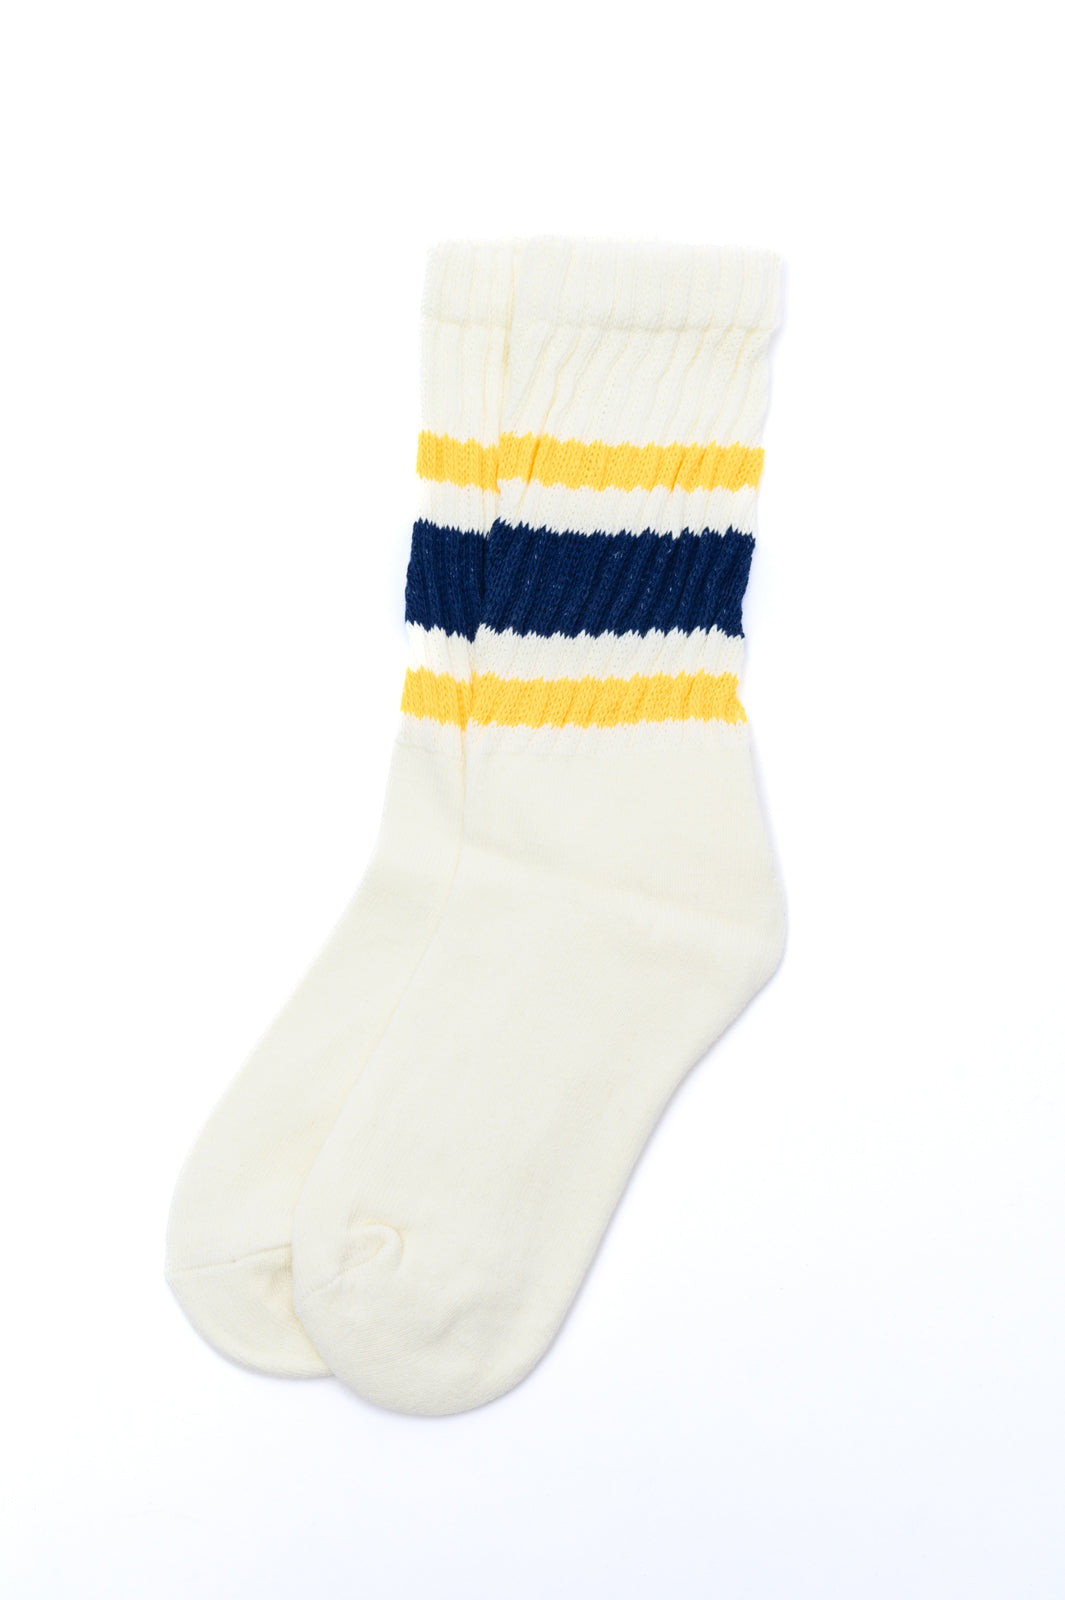 World's Best Dad Socks in Navy and Yellow Ave Shops